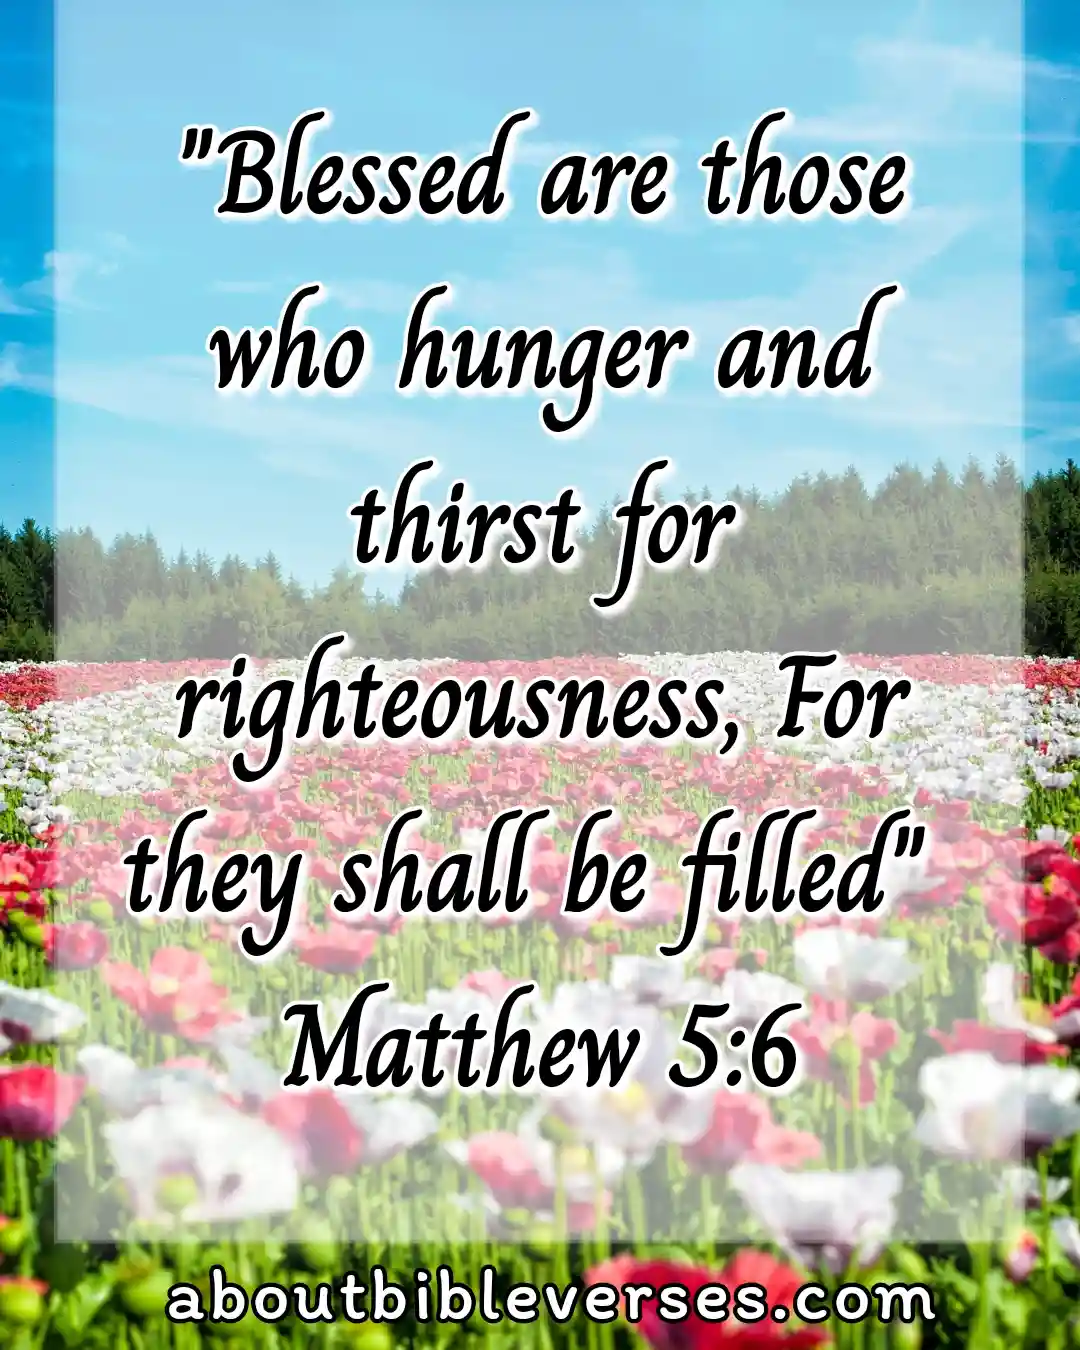 Bible Verses About Righteousness (Matthew 5:6)